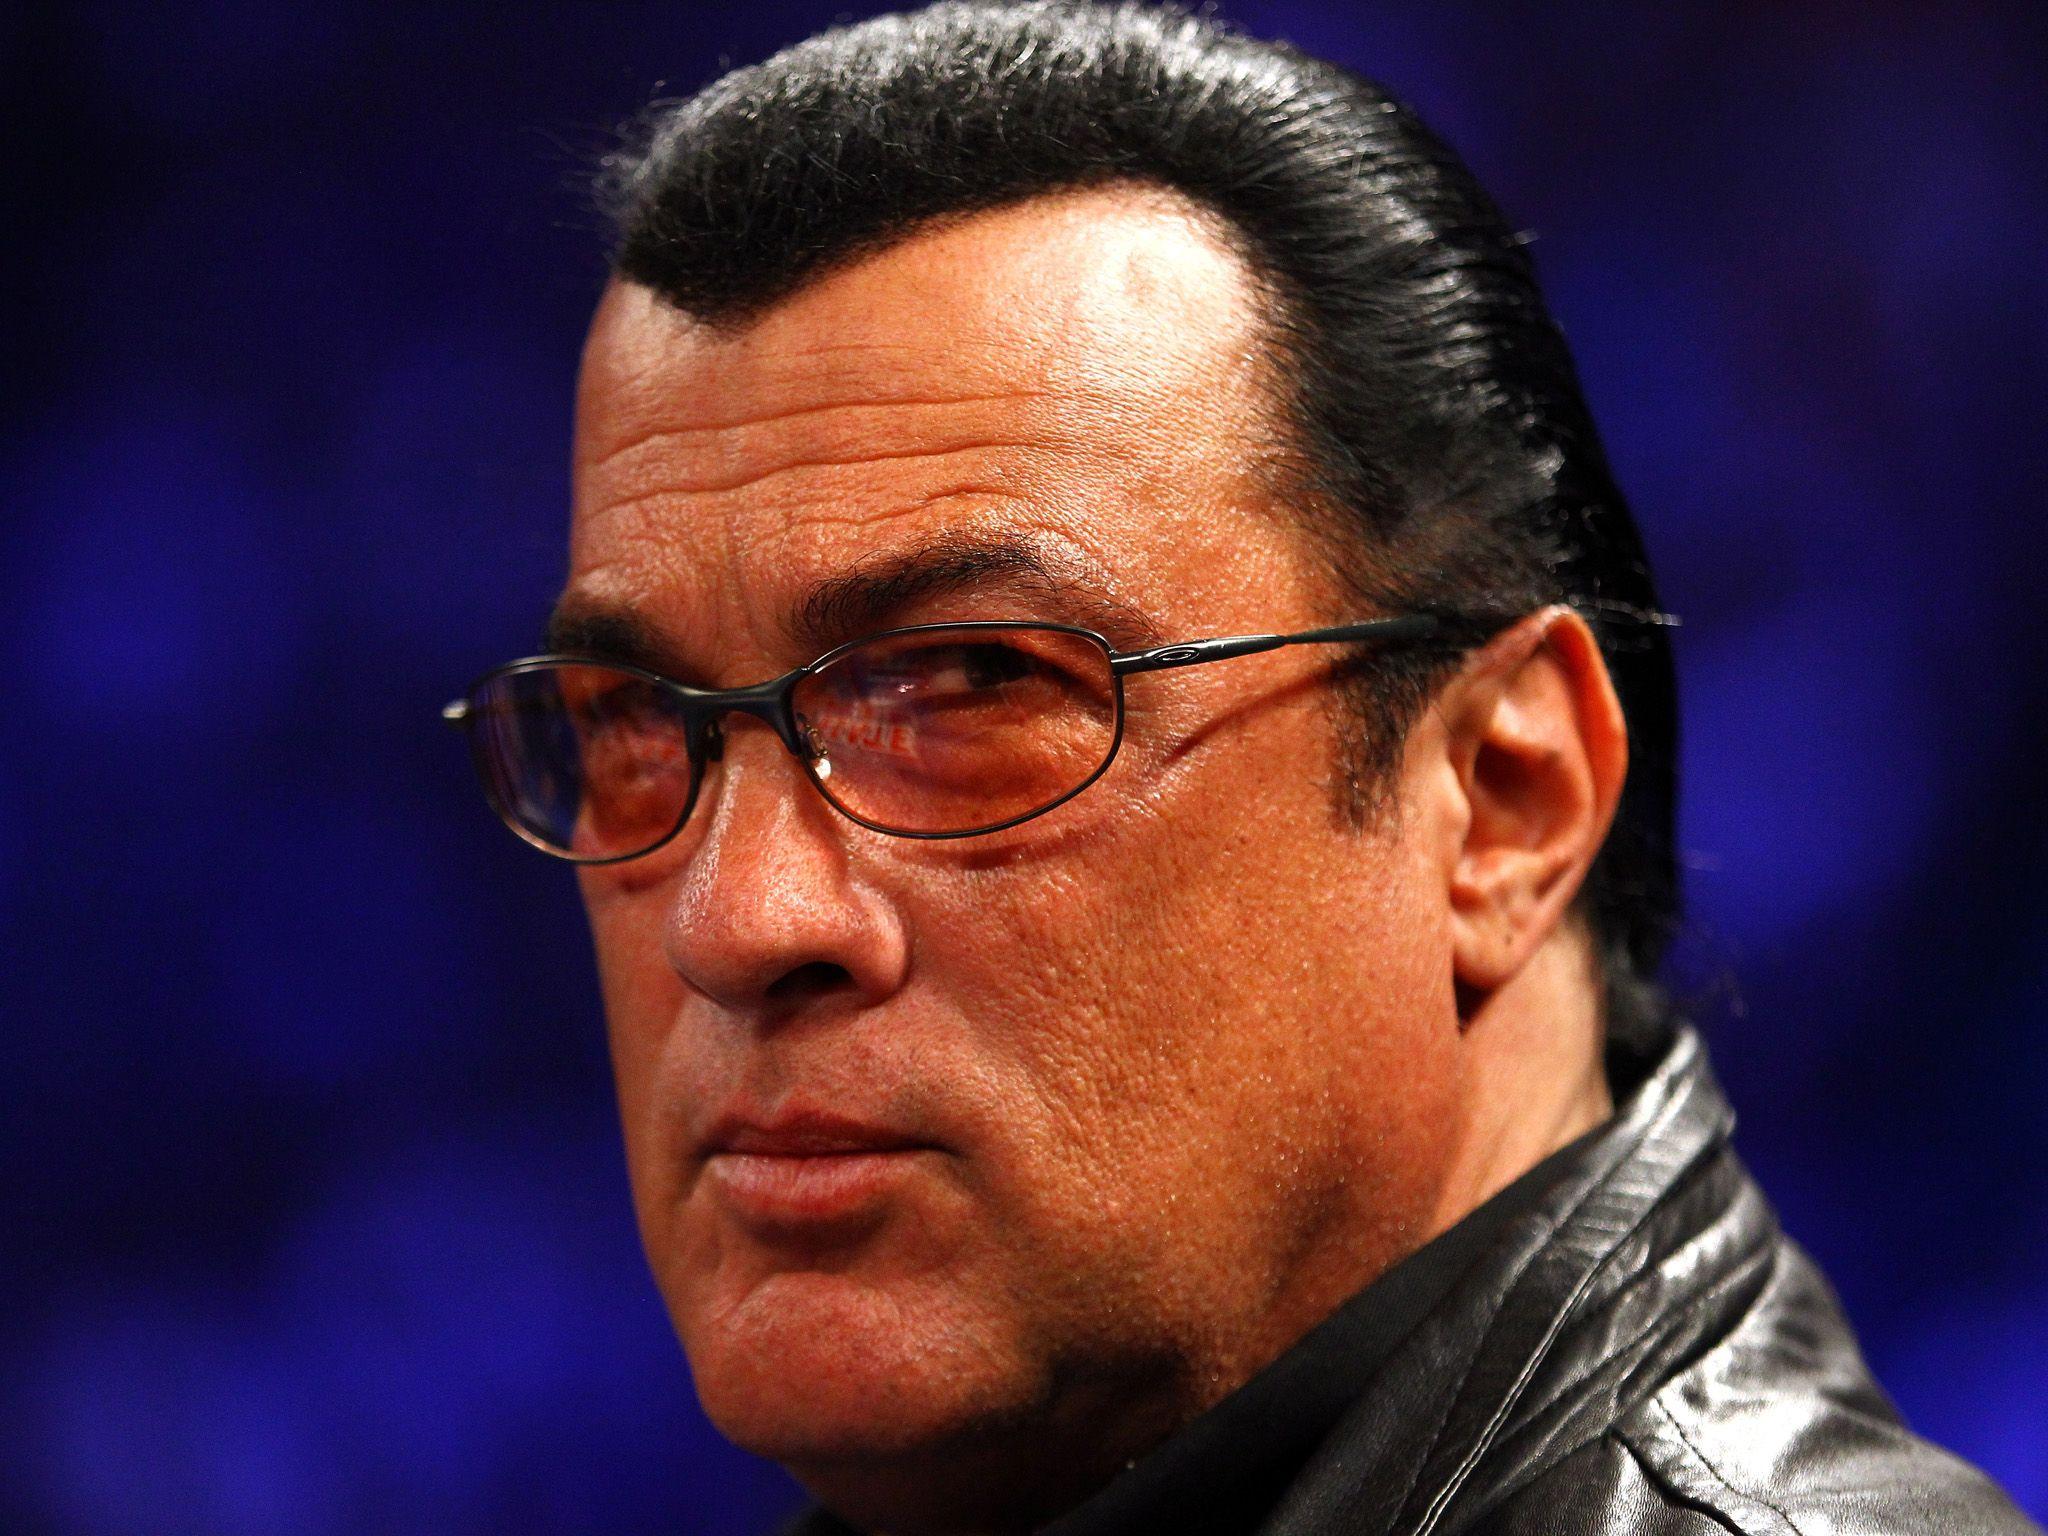 Marked for Governor: Steven Seagal hints at Arizona election bid